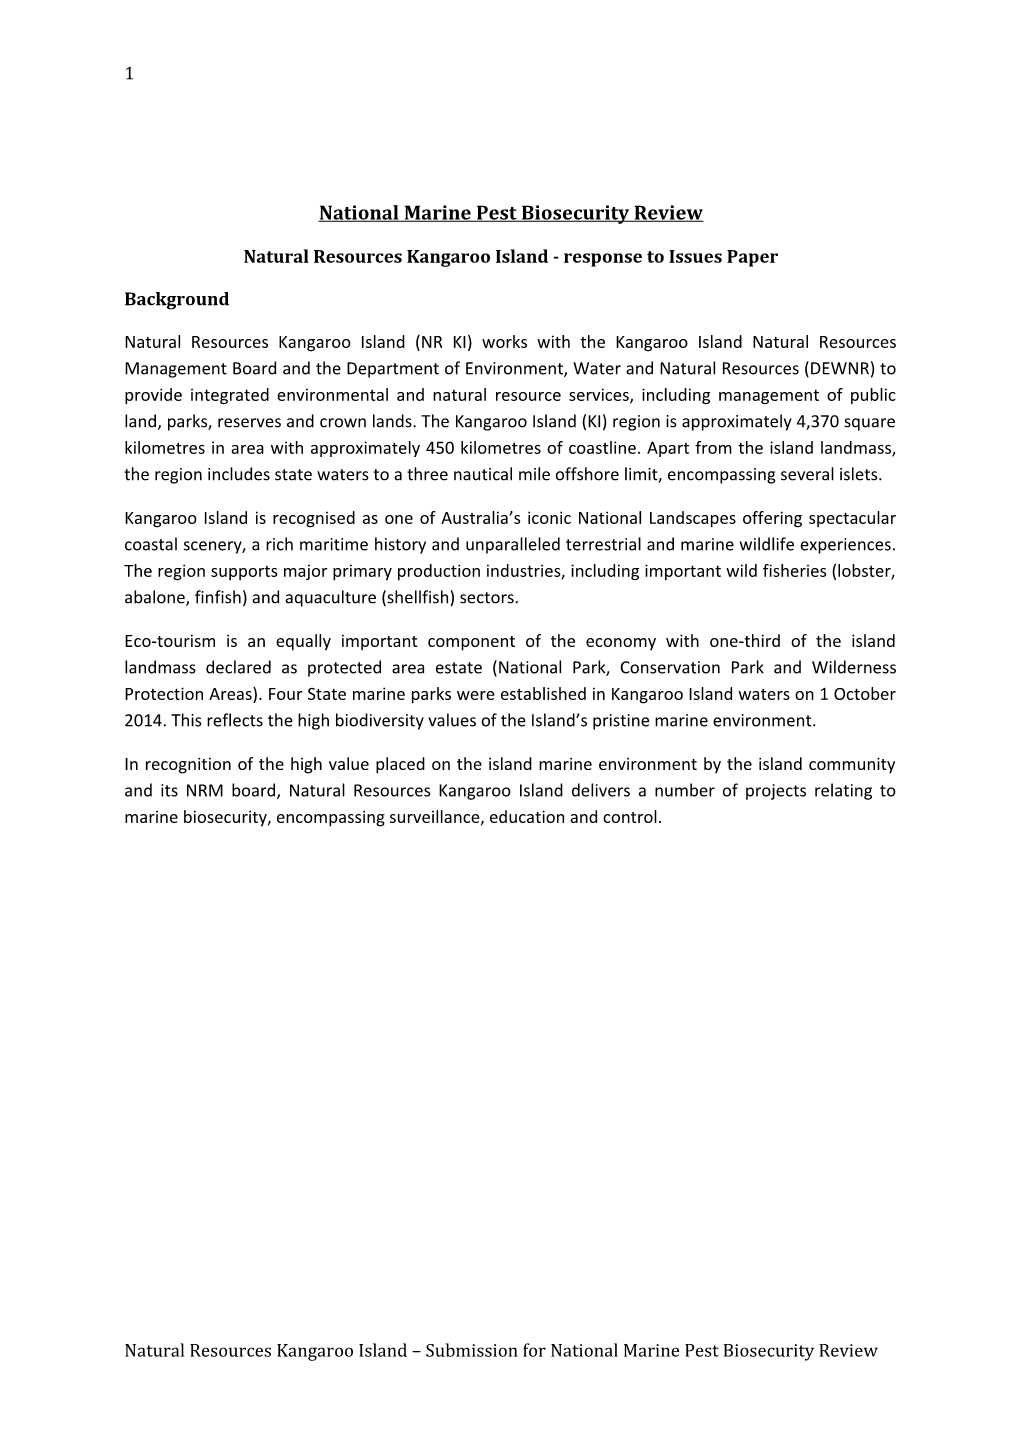 Natural Resources Kangaroo Island - Response to Issues Paper